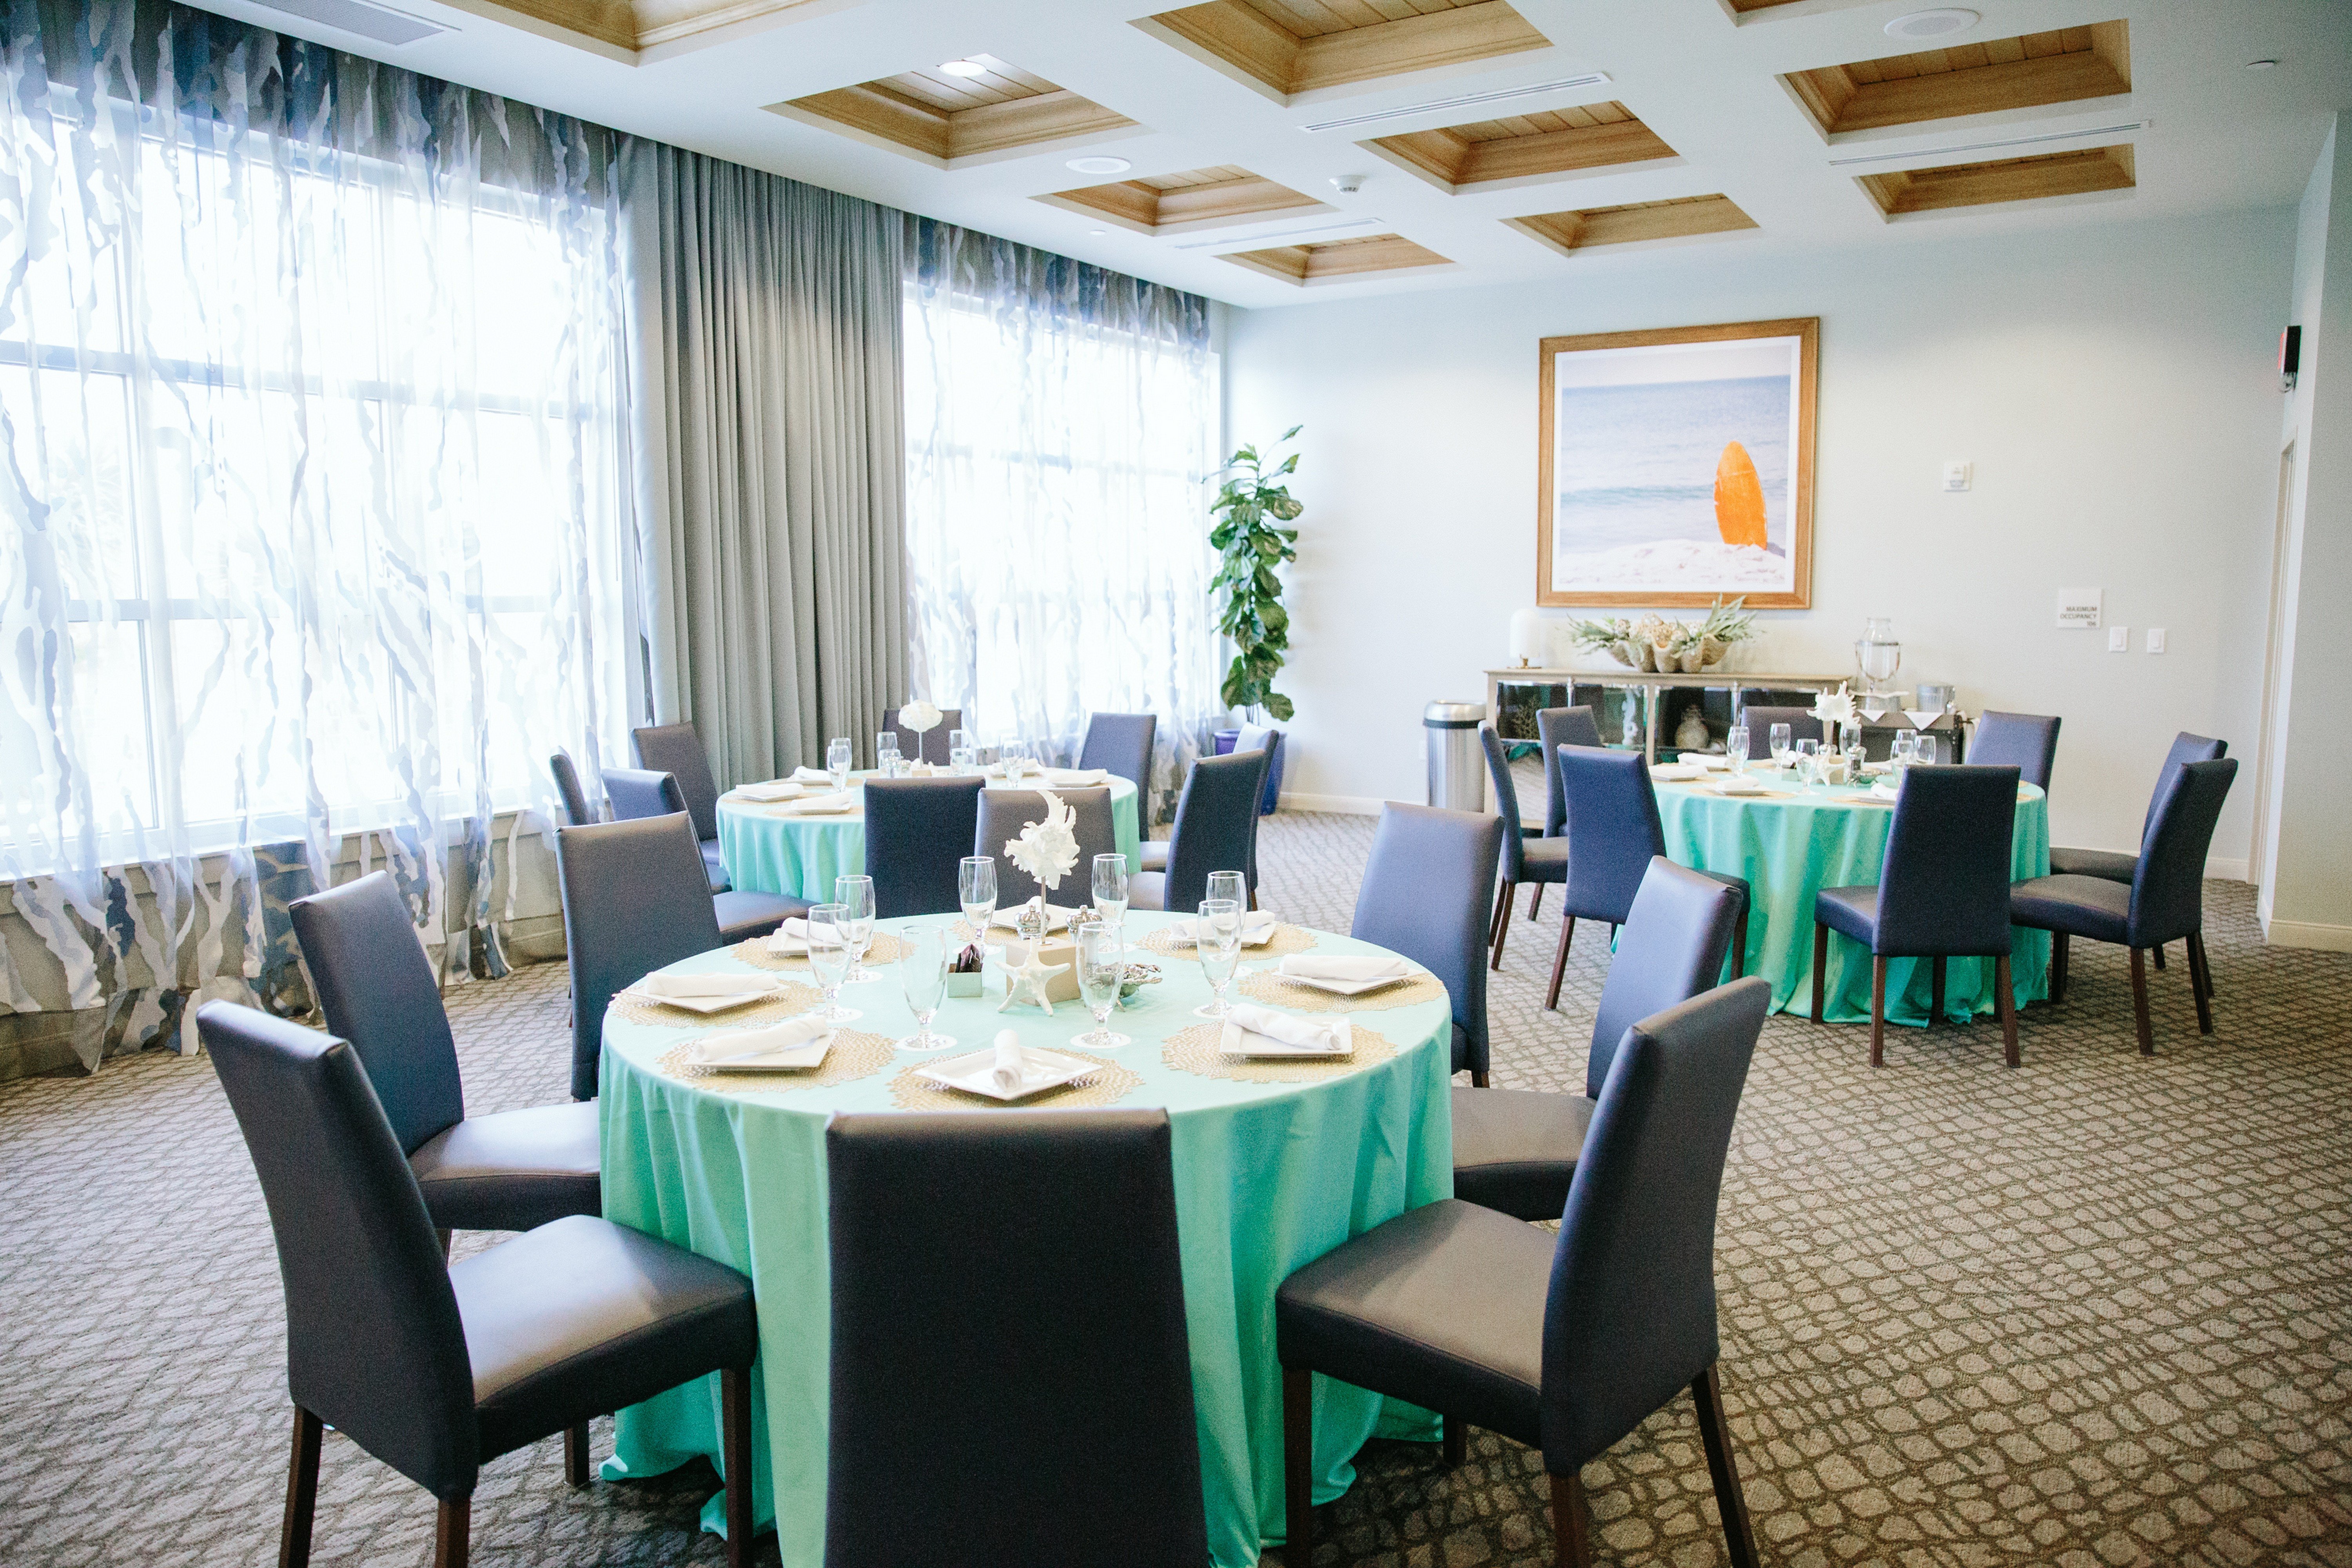 Hold your next social event in one of our Banquet rooms